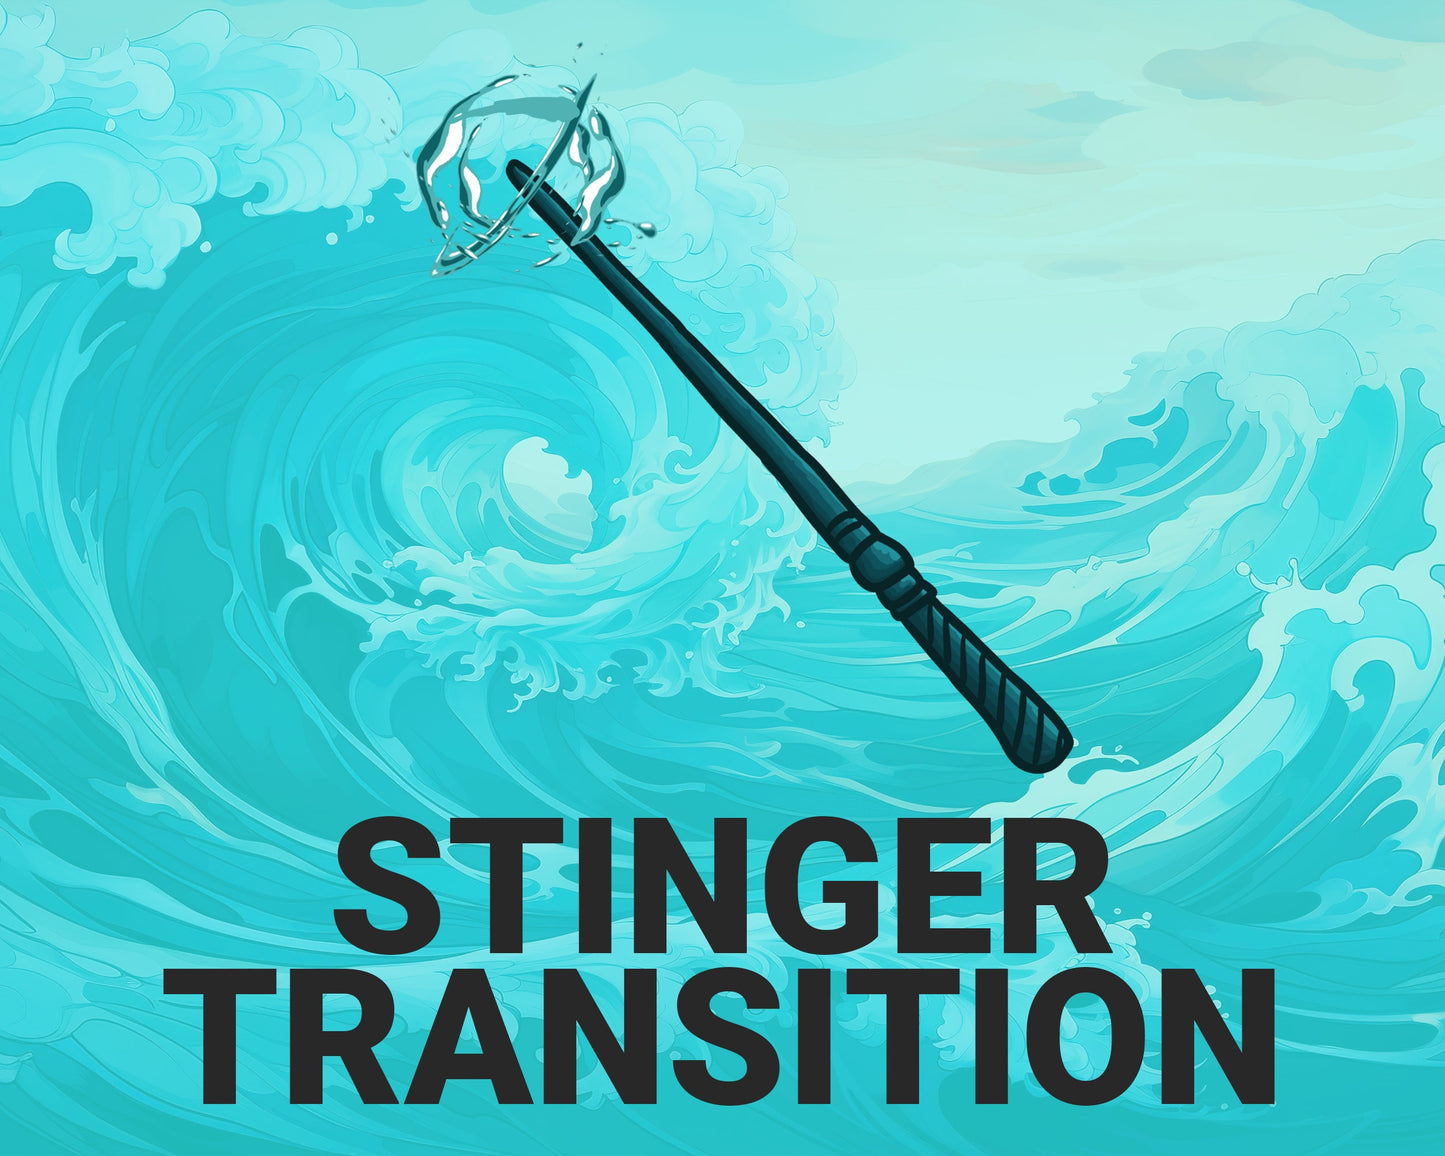 Water Magic Wand Stinger Transition, Magical Cute Animated Twitch Overlays, Elemental YouTube Facebook and Kick Transitions for Streamers